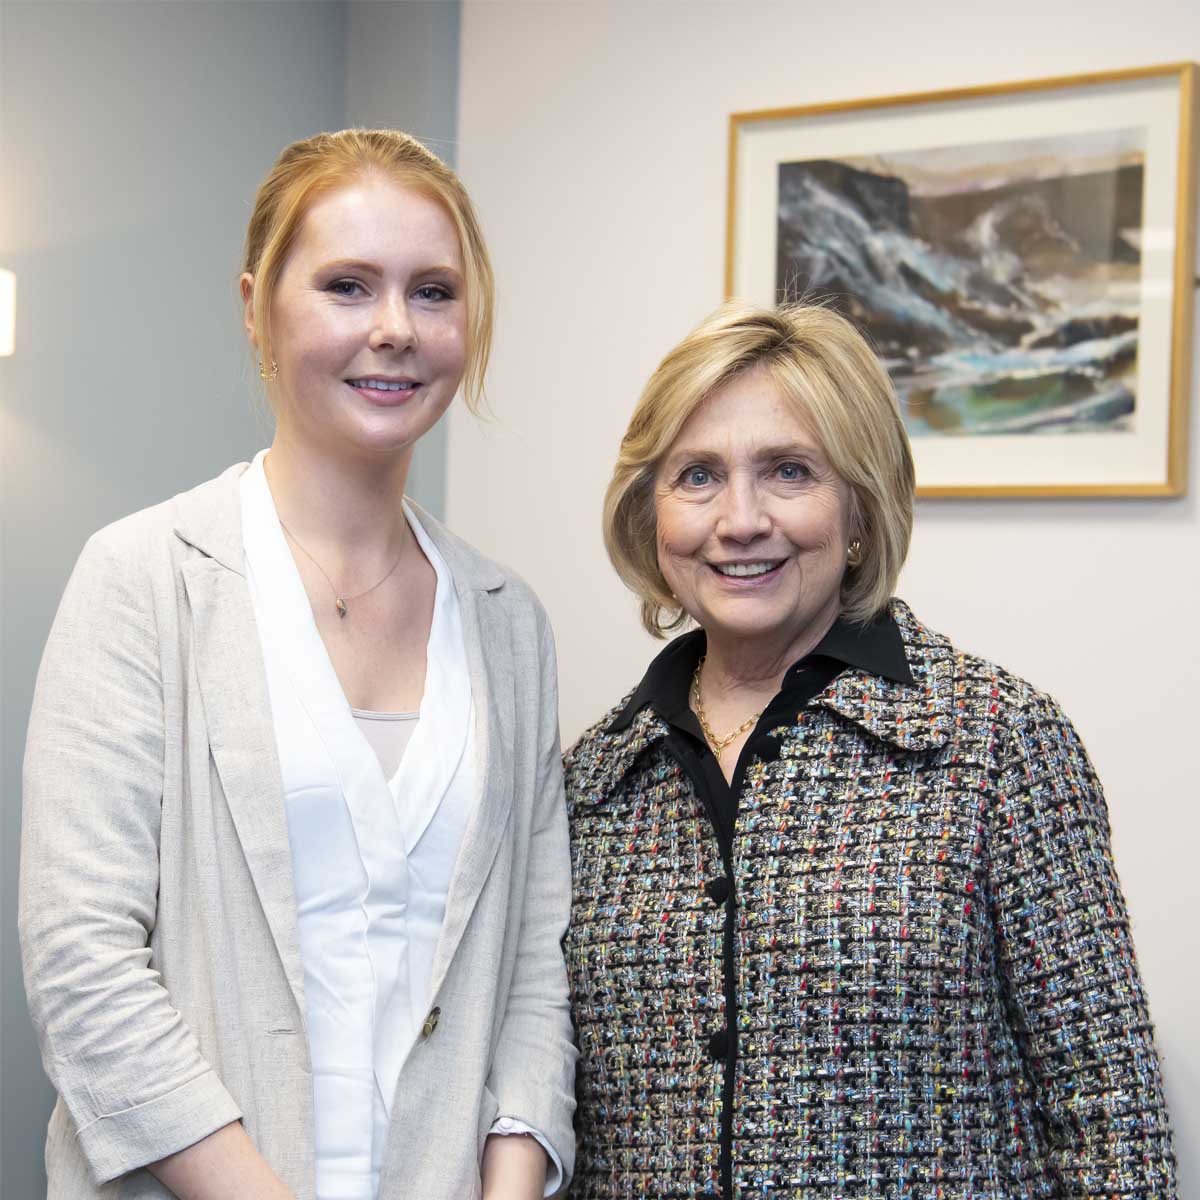 Angharad Devereux with Hillary Clinton